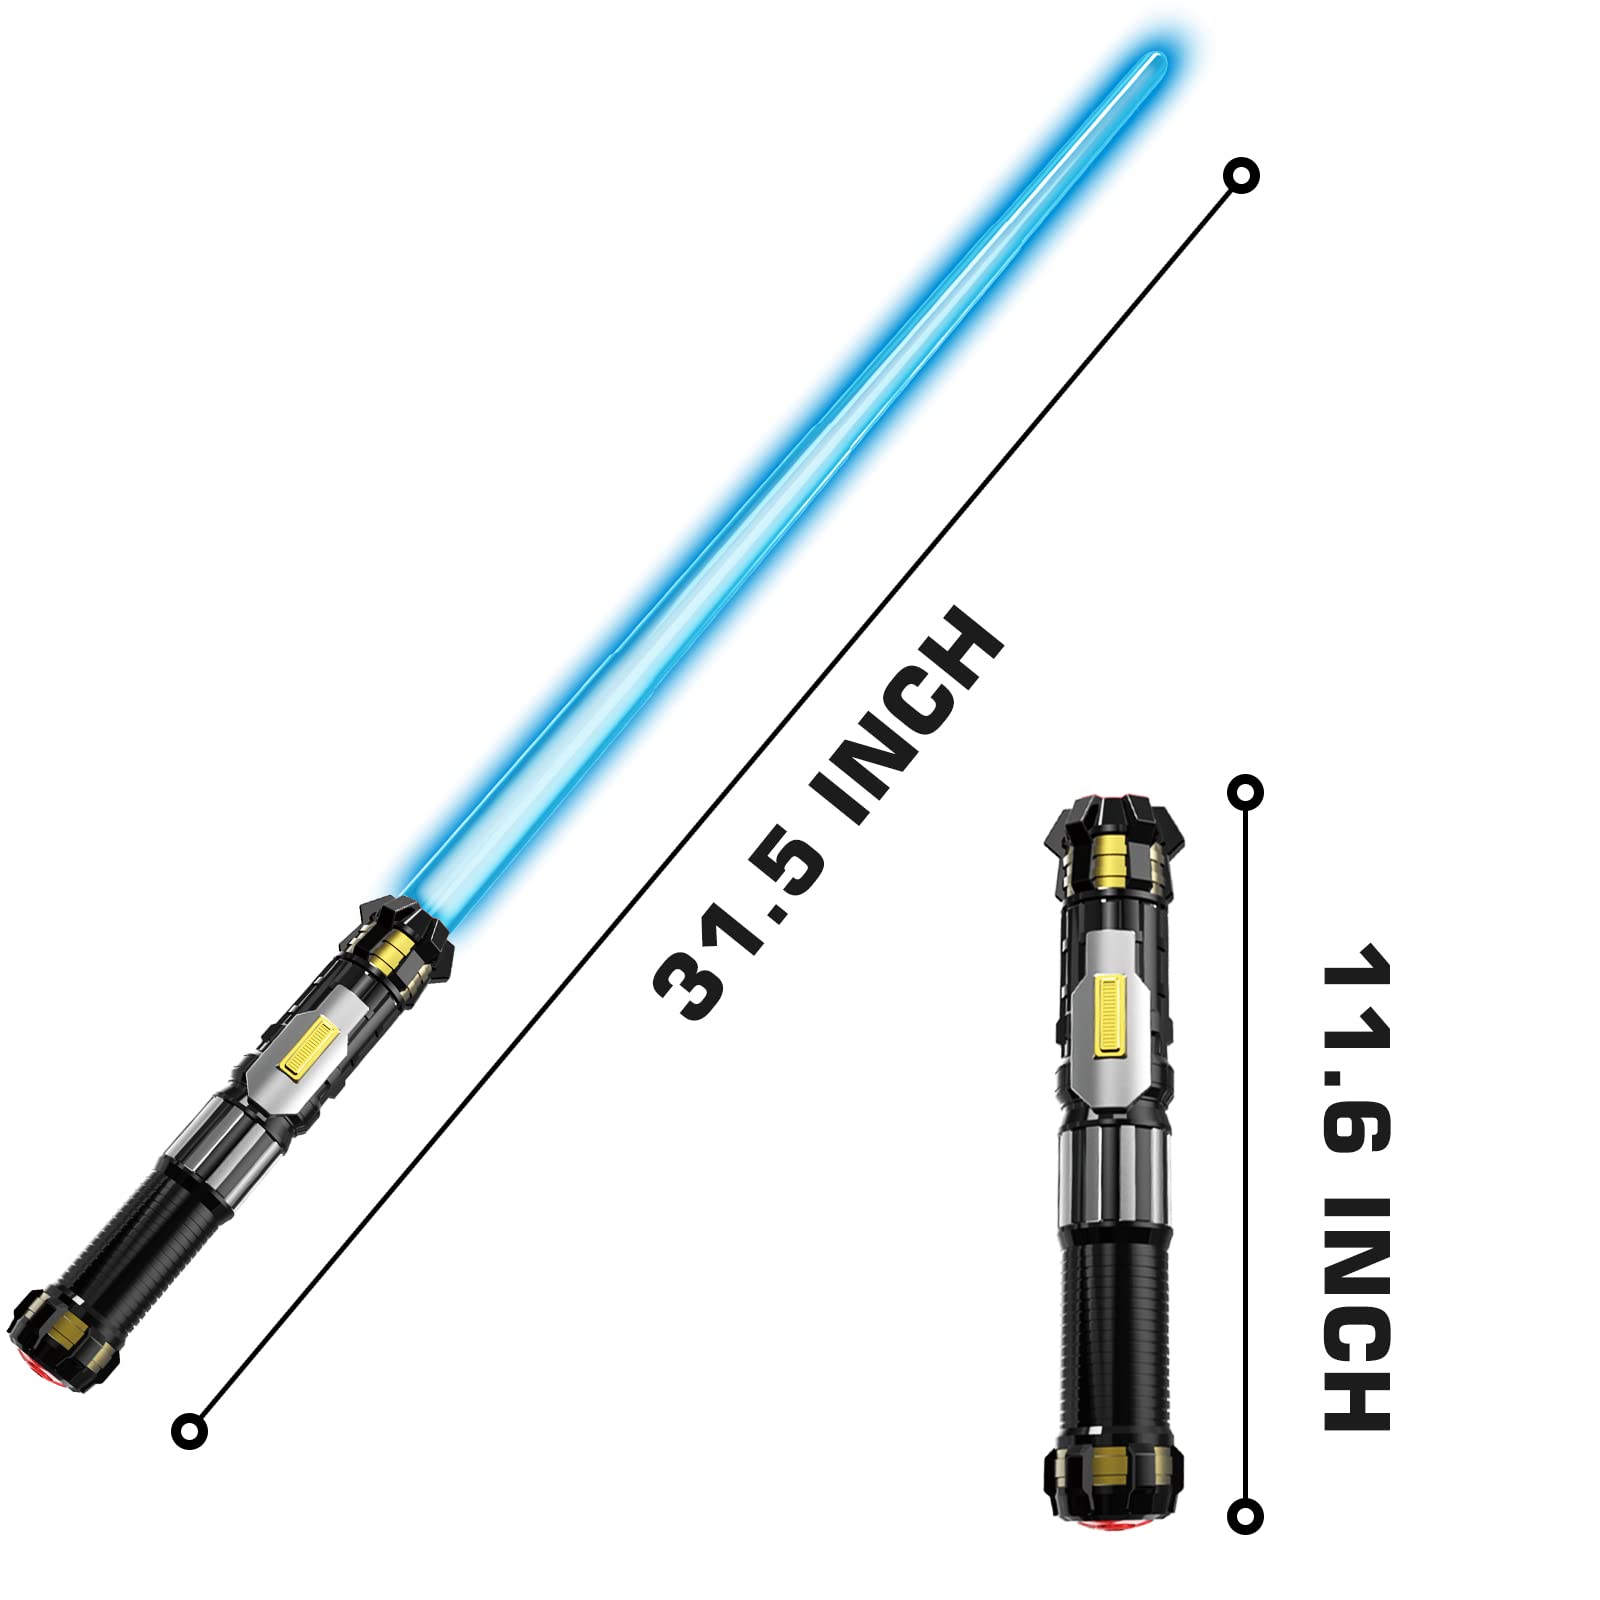 4 Pack Light up Saber with FX Sound (on-Off Control) and Full Retractable Handle, 4 Colors LED Glow in The Dark Sword Toy for Kids Adult